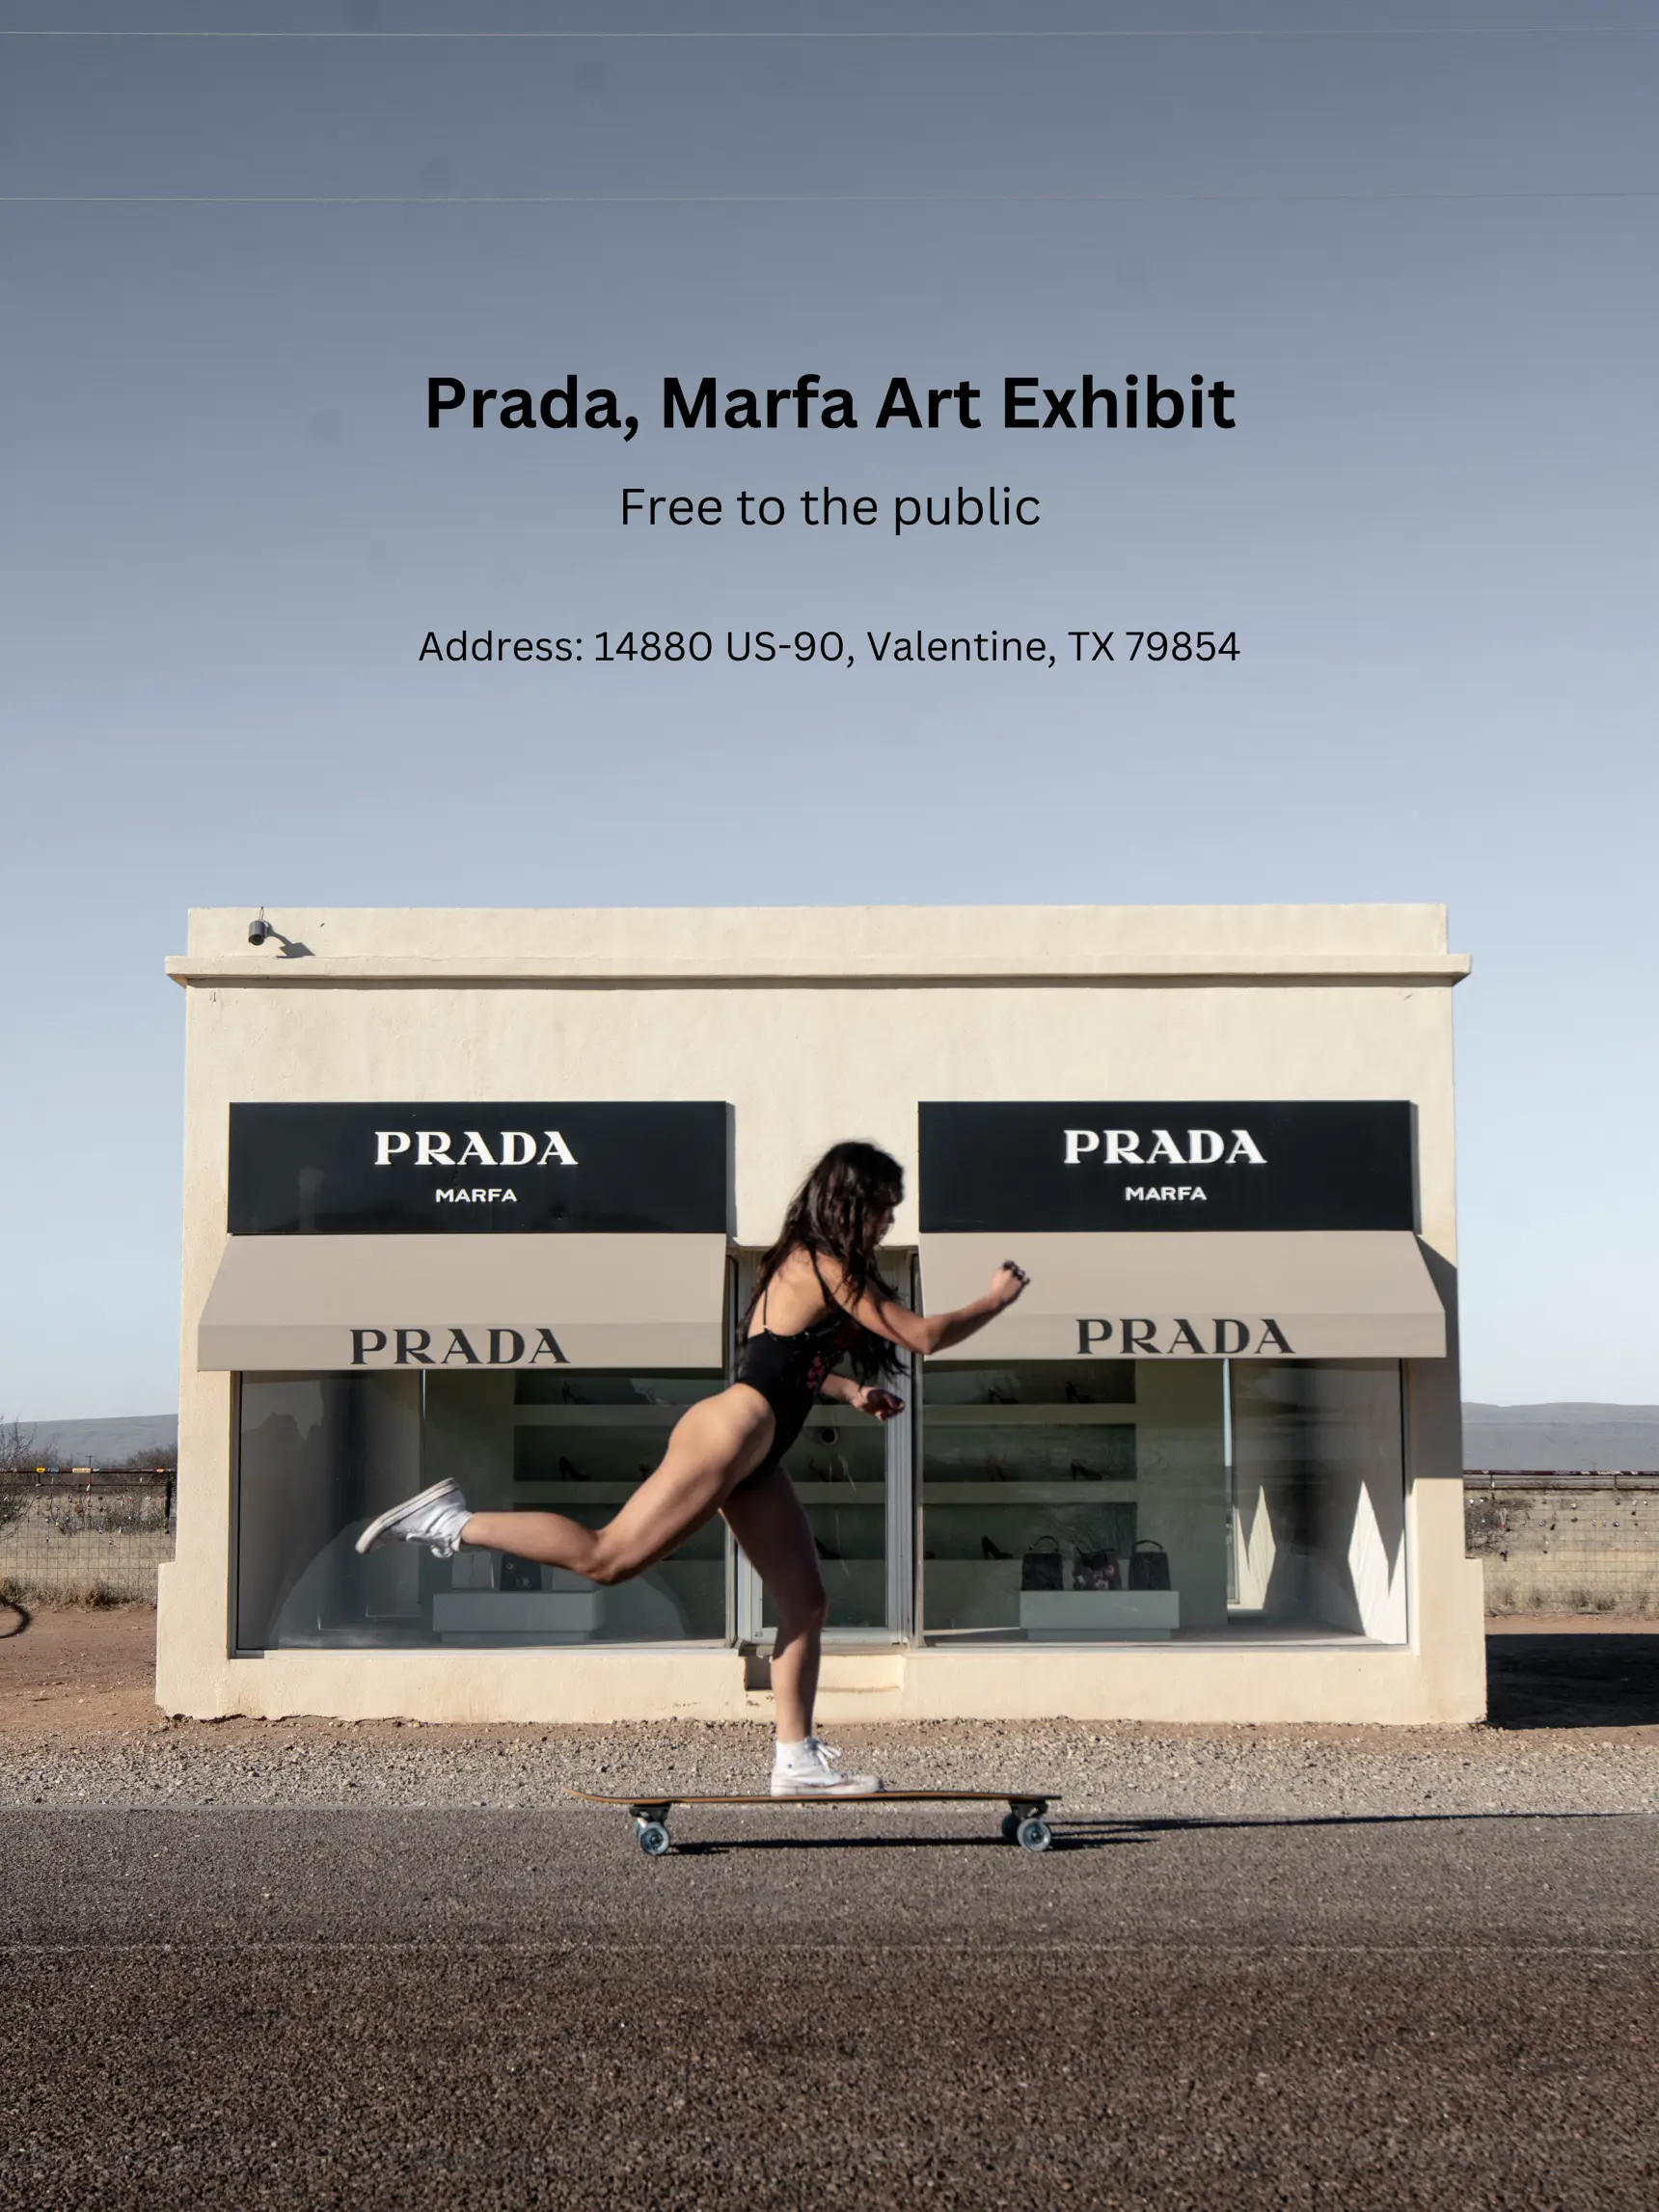  A woman is skateboarding in front of a Prada store.